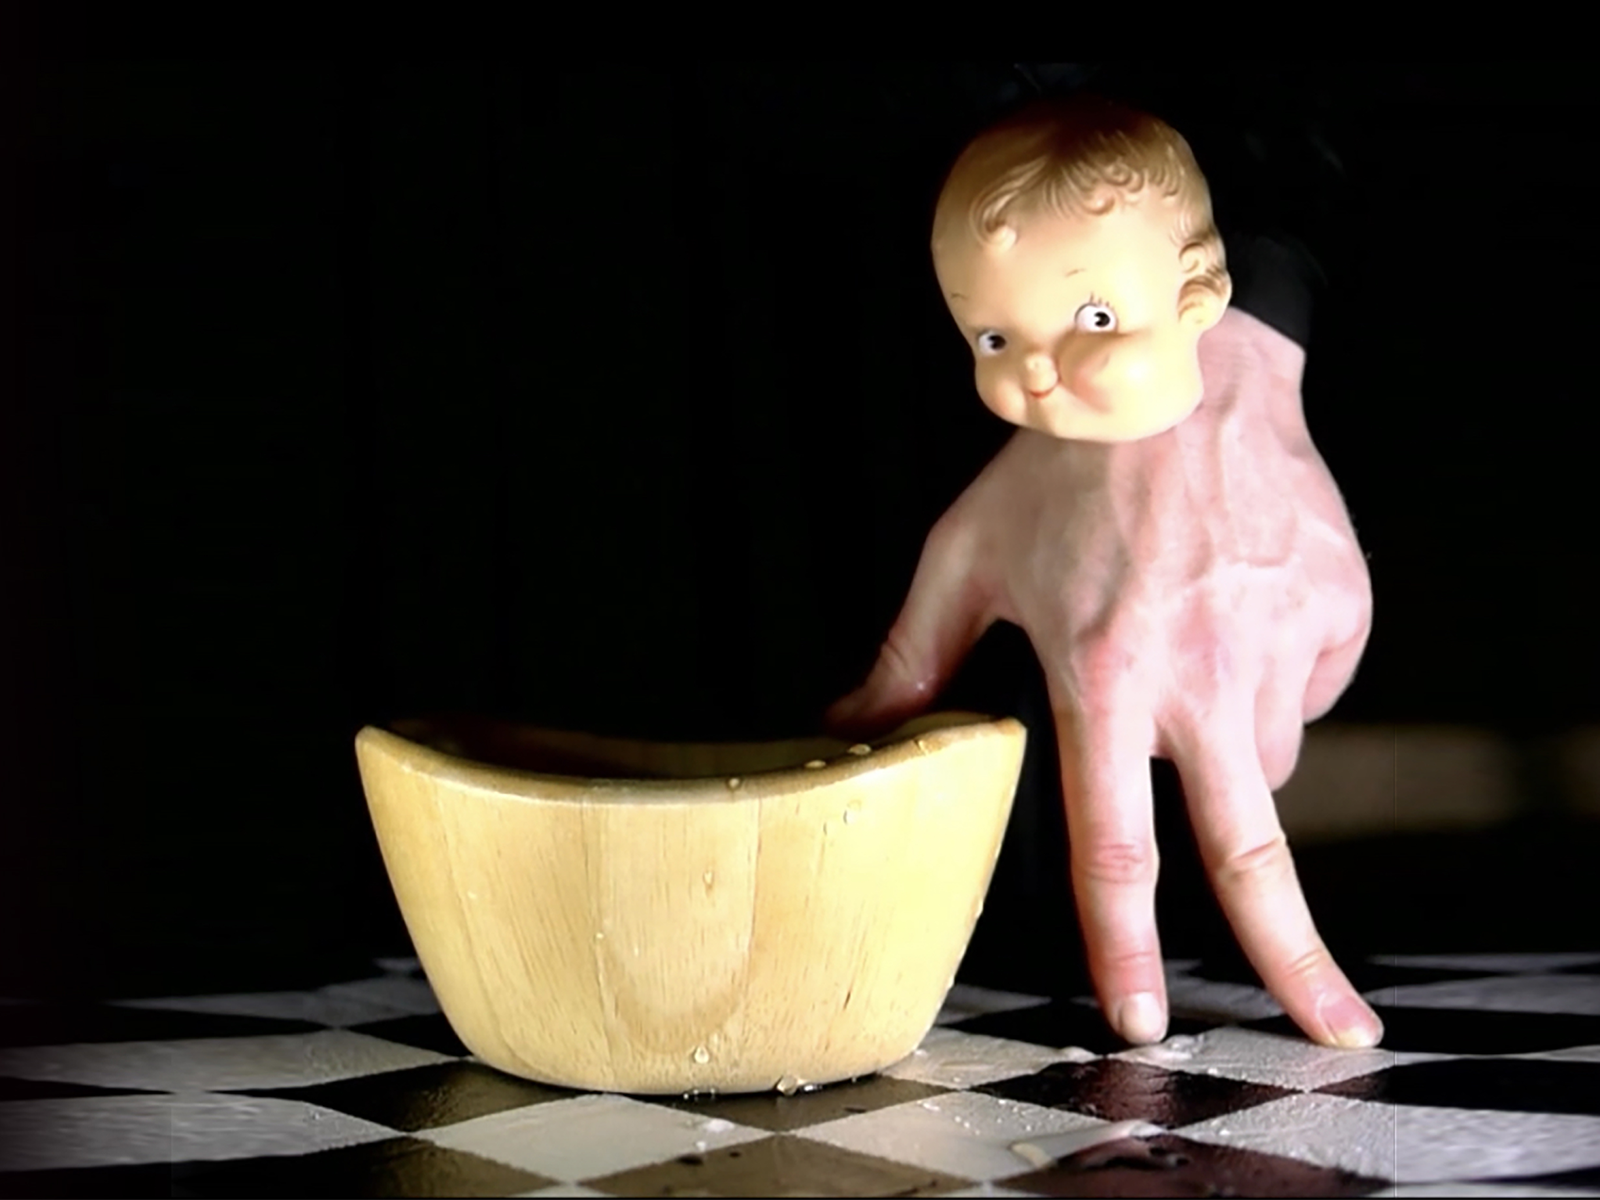 Epidermis Circus: The Weirdest Puppet Show You've Ever Seen: What to expect - 8